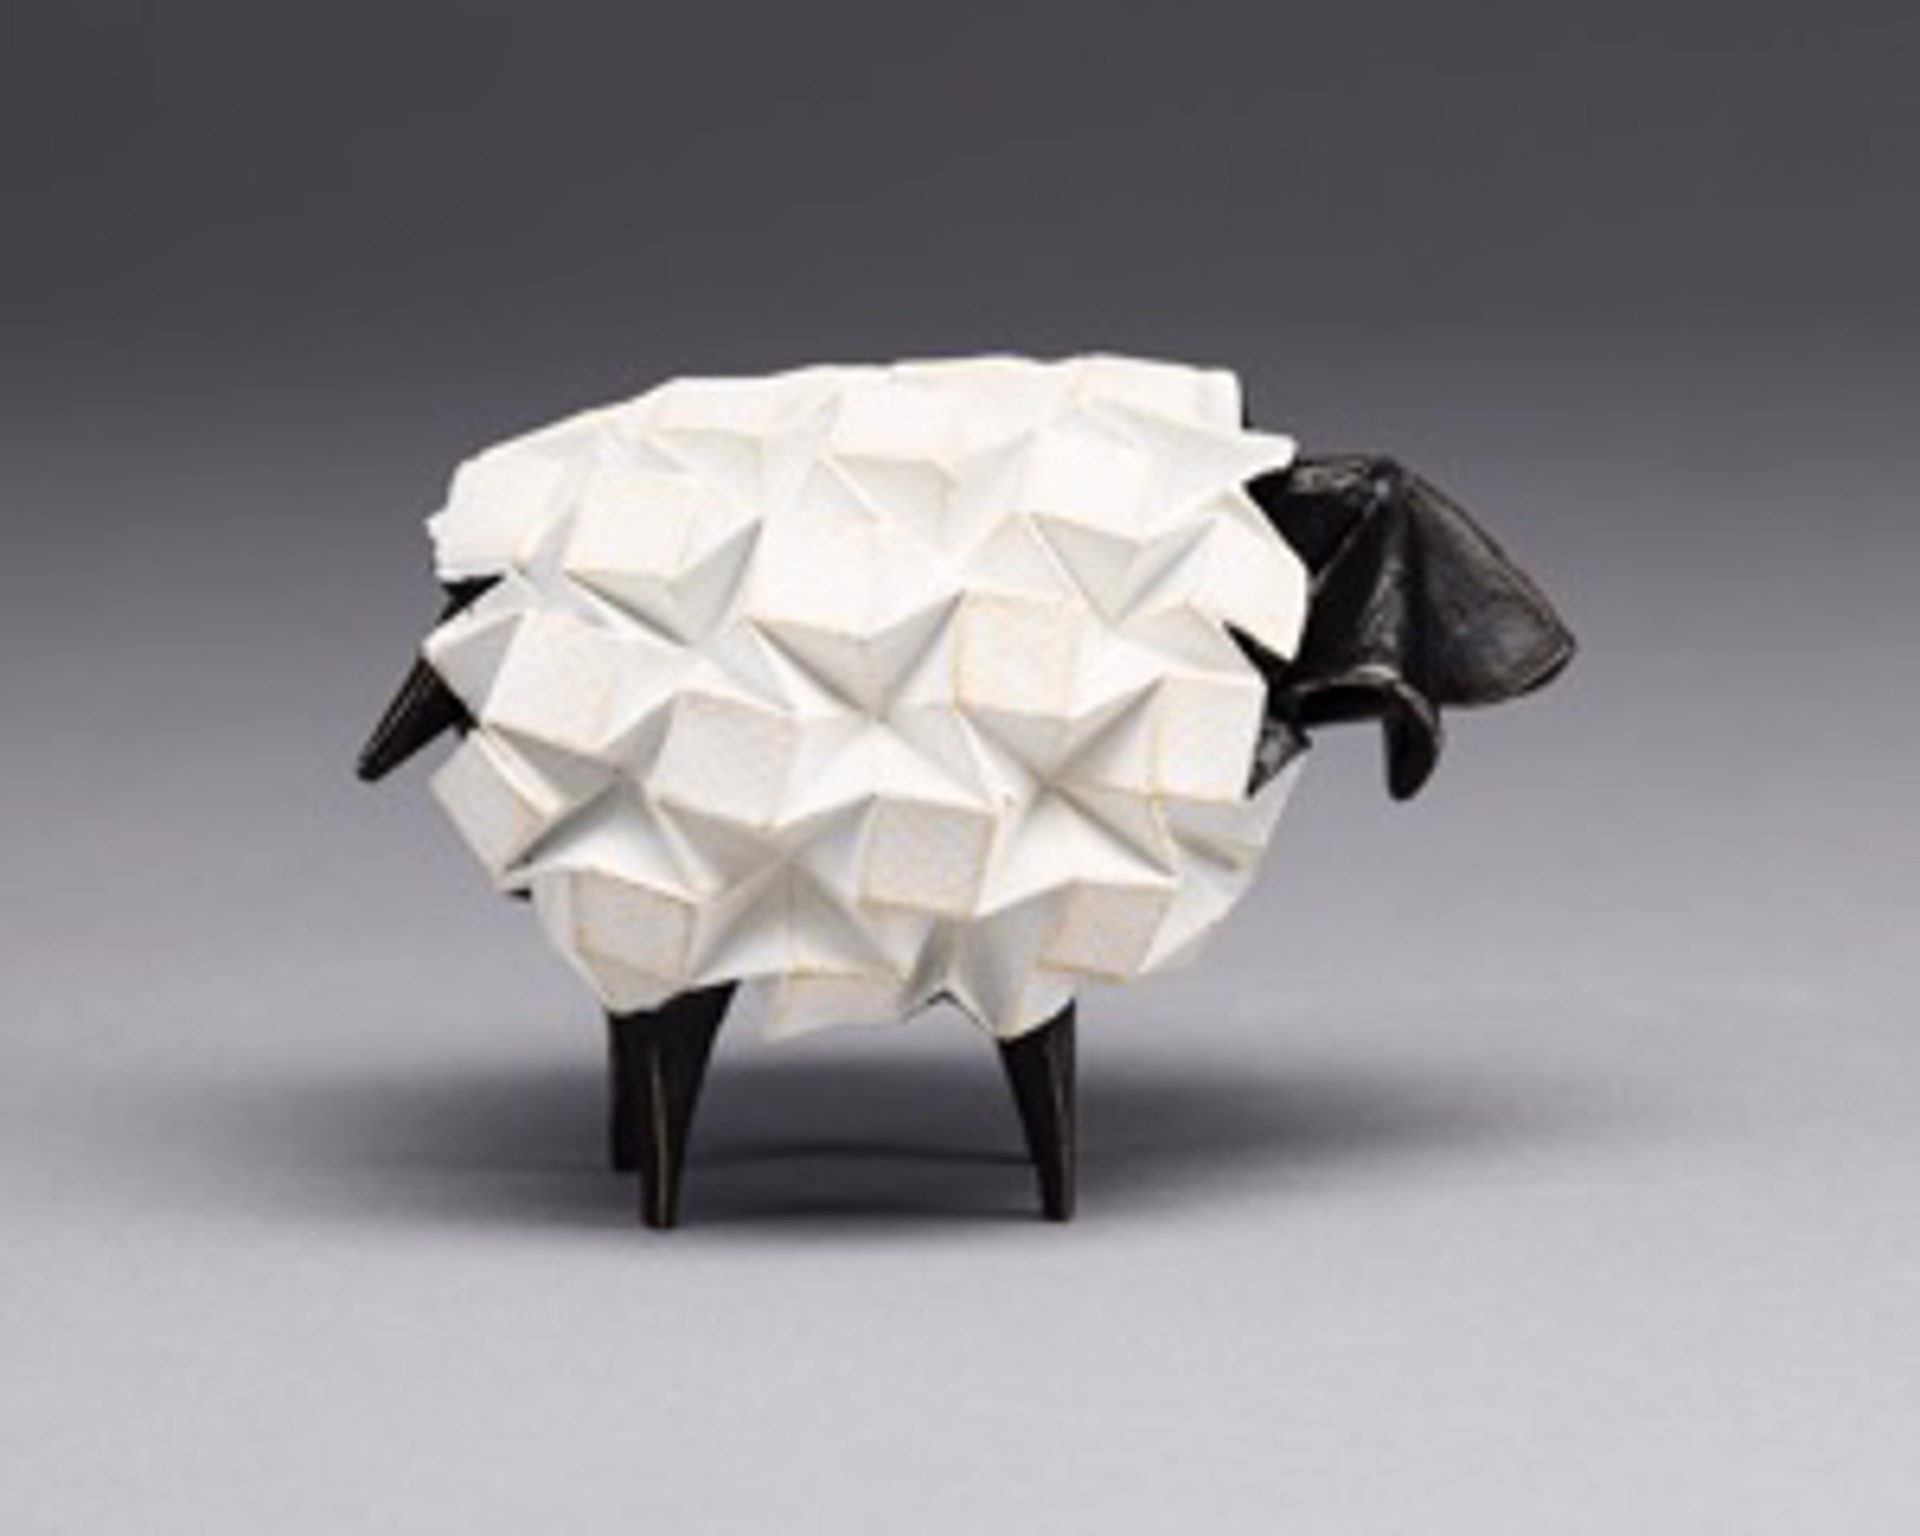 Ewe & Me (in collaboration with Beth Johnson) by KEVIN BOX